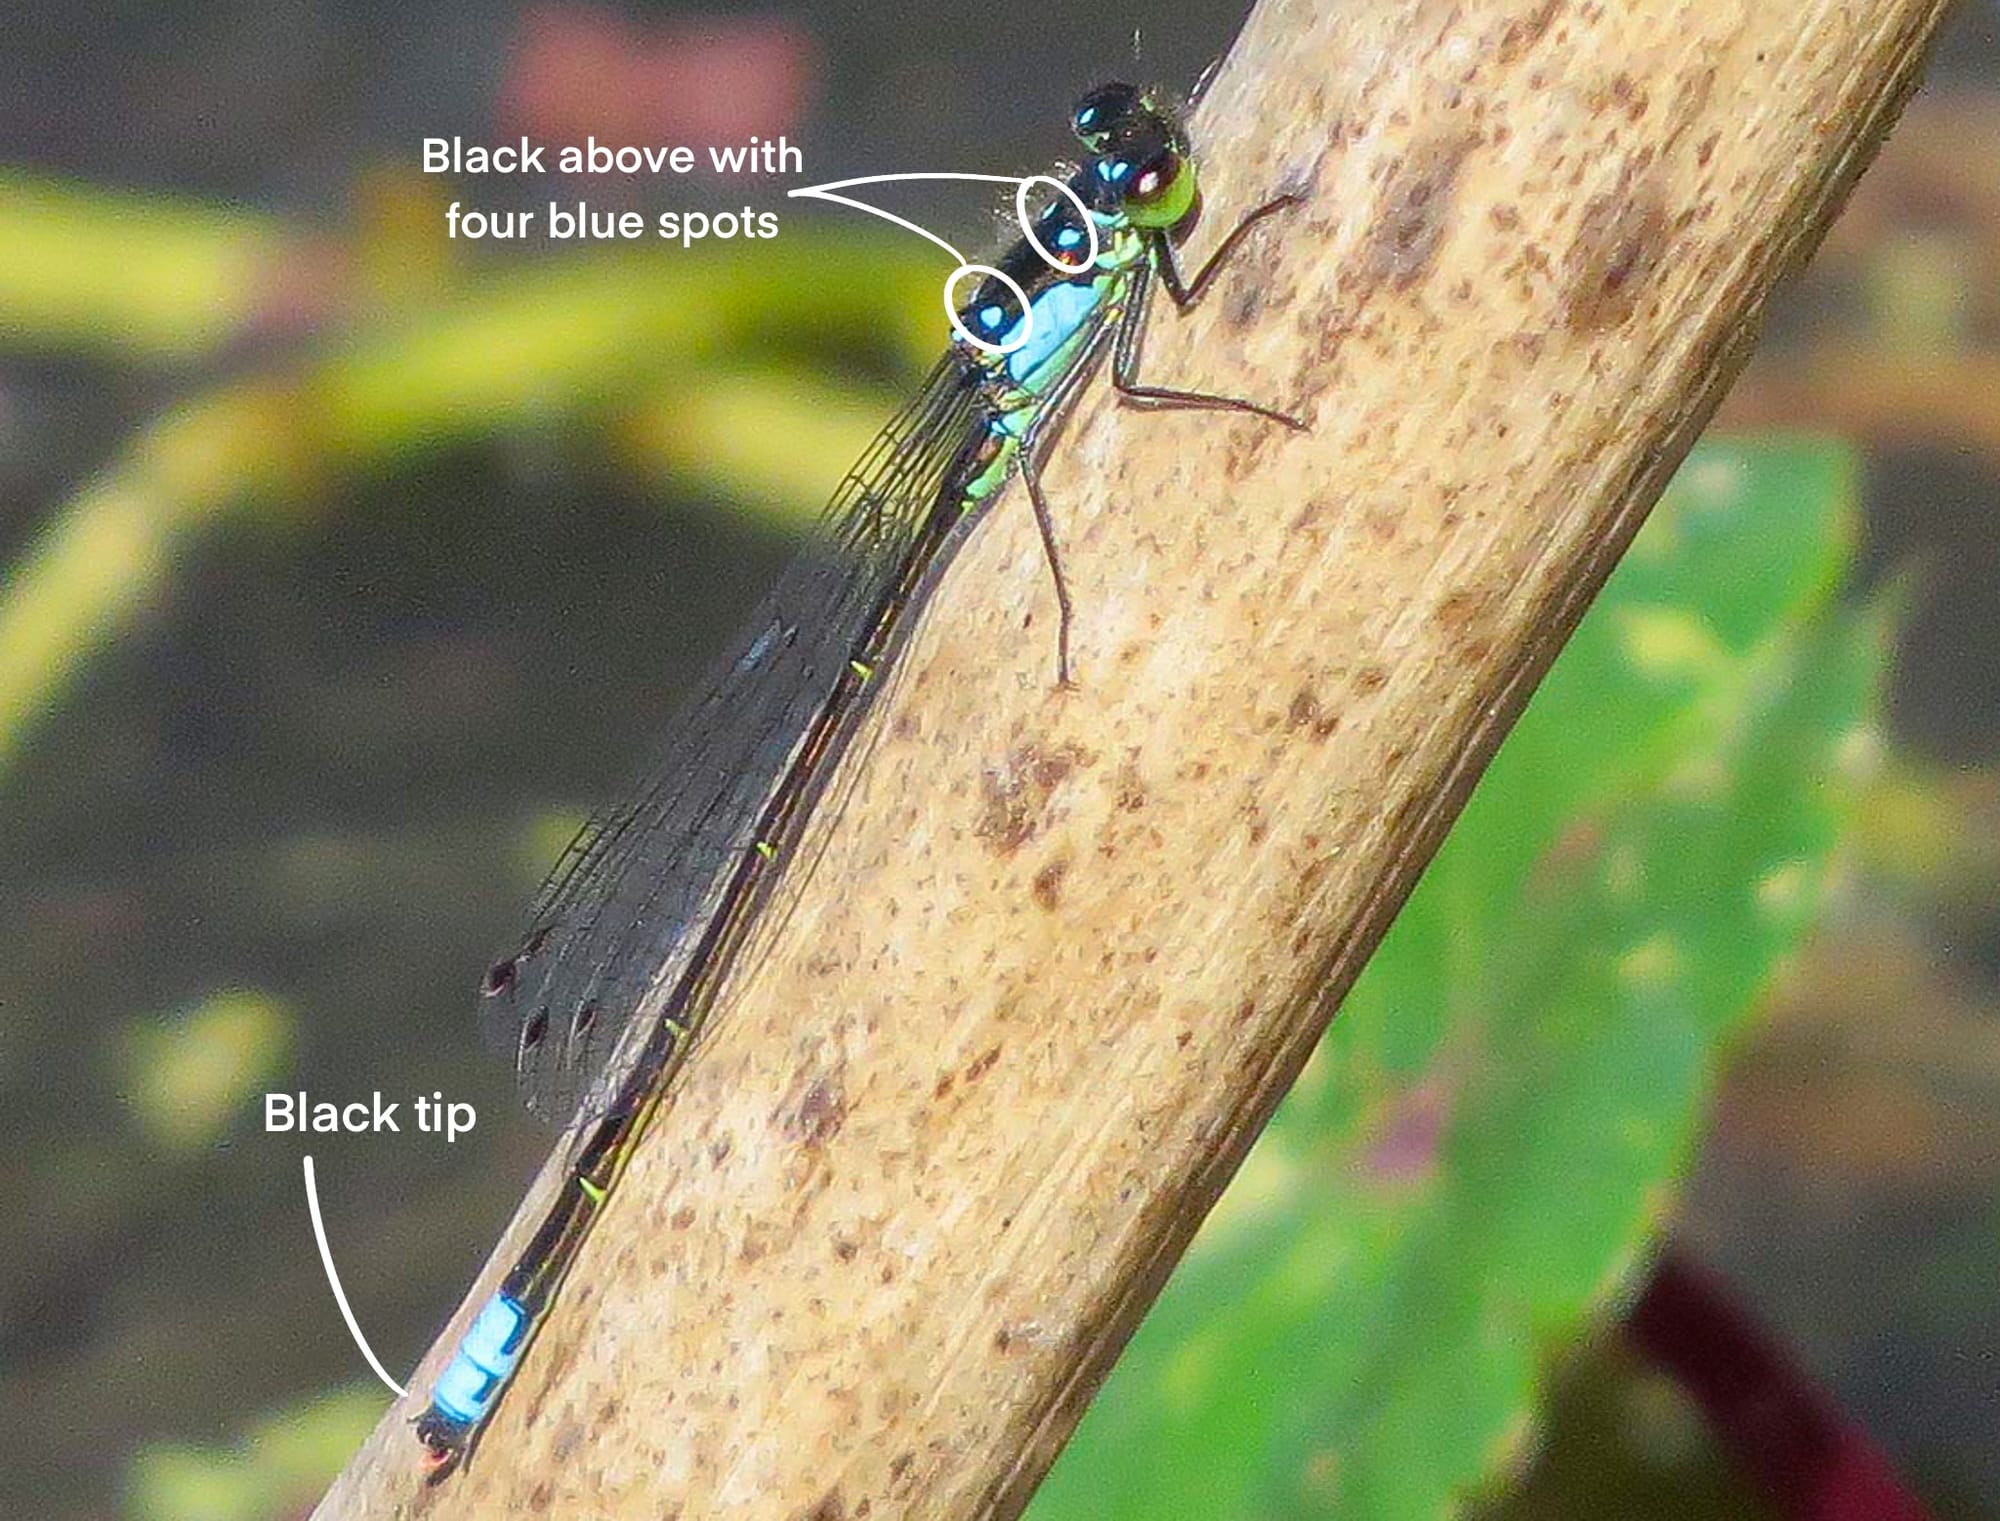 Pacific forktail